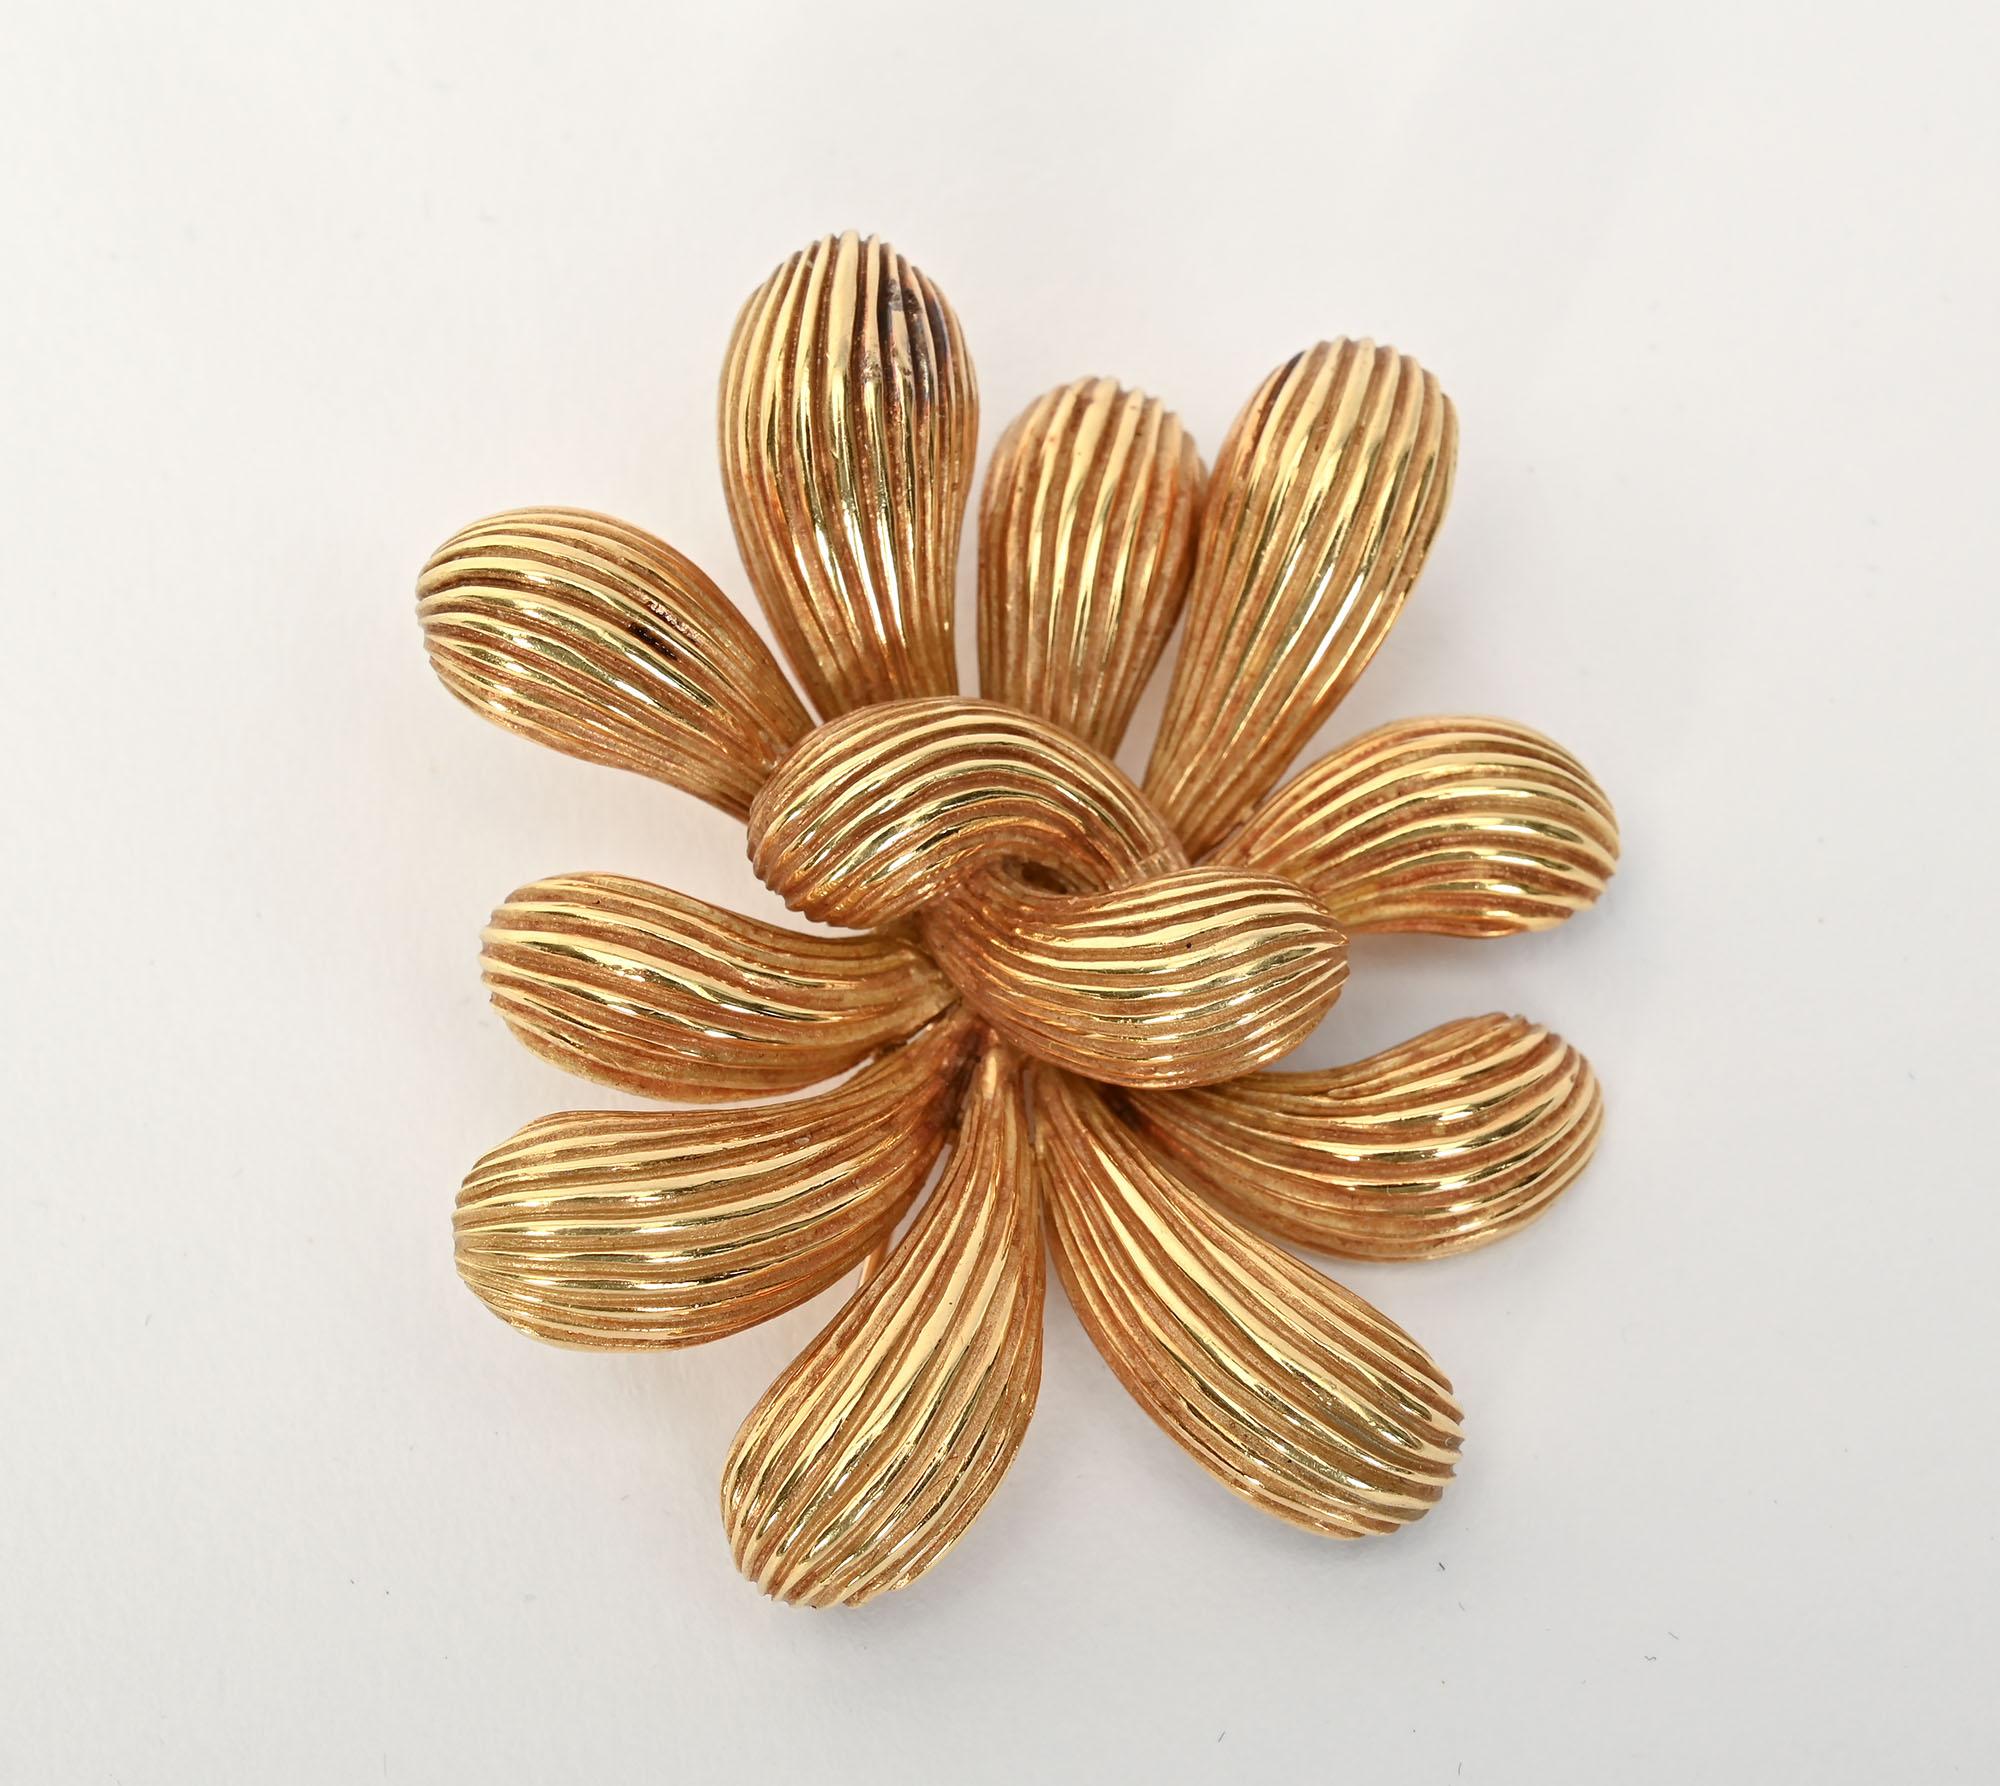 Cartier abstract form brooch with striated lobes going in different directions. It is nicely three dimensional. The brooch can be worn either vertically or horizontally. It measures 2 1/4